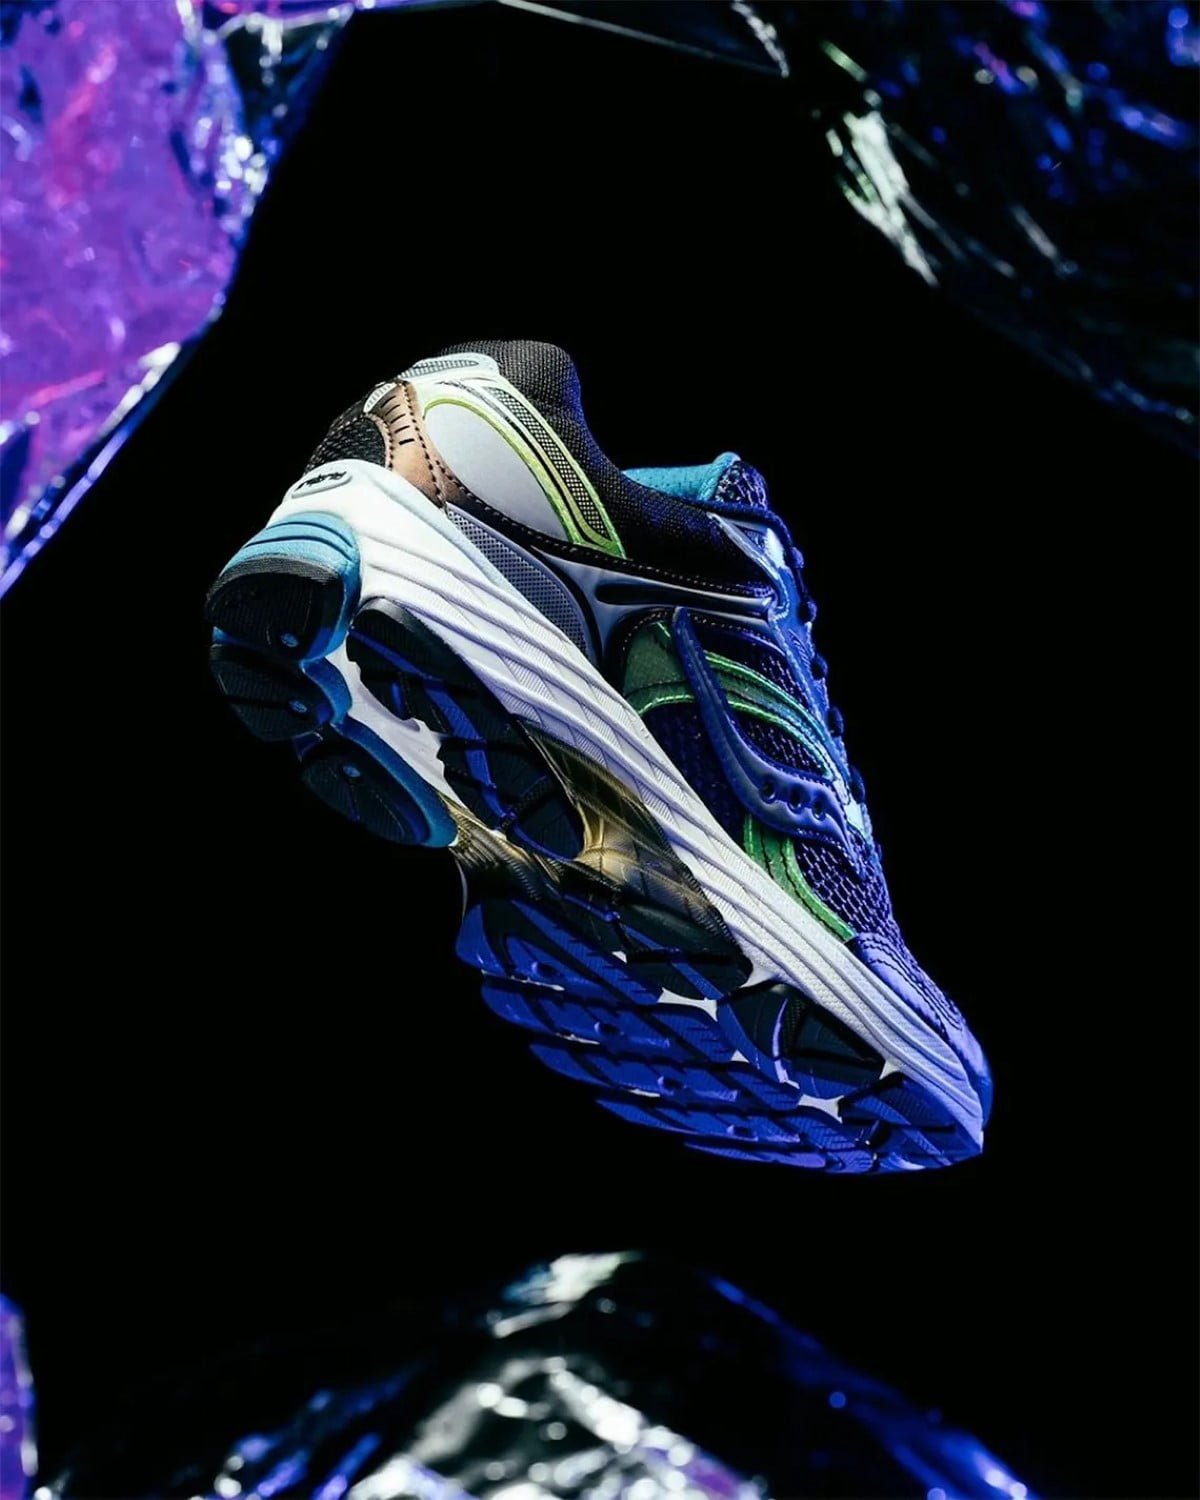 Walking into the "Crystal Caves" with Saucony ProGrid Omni 9